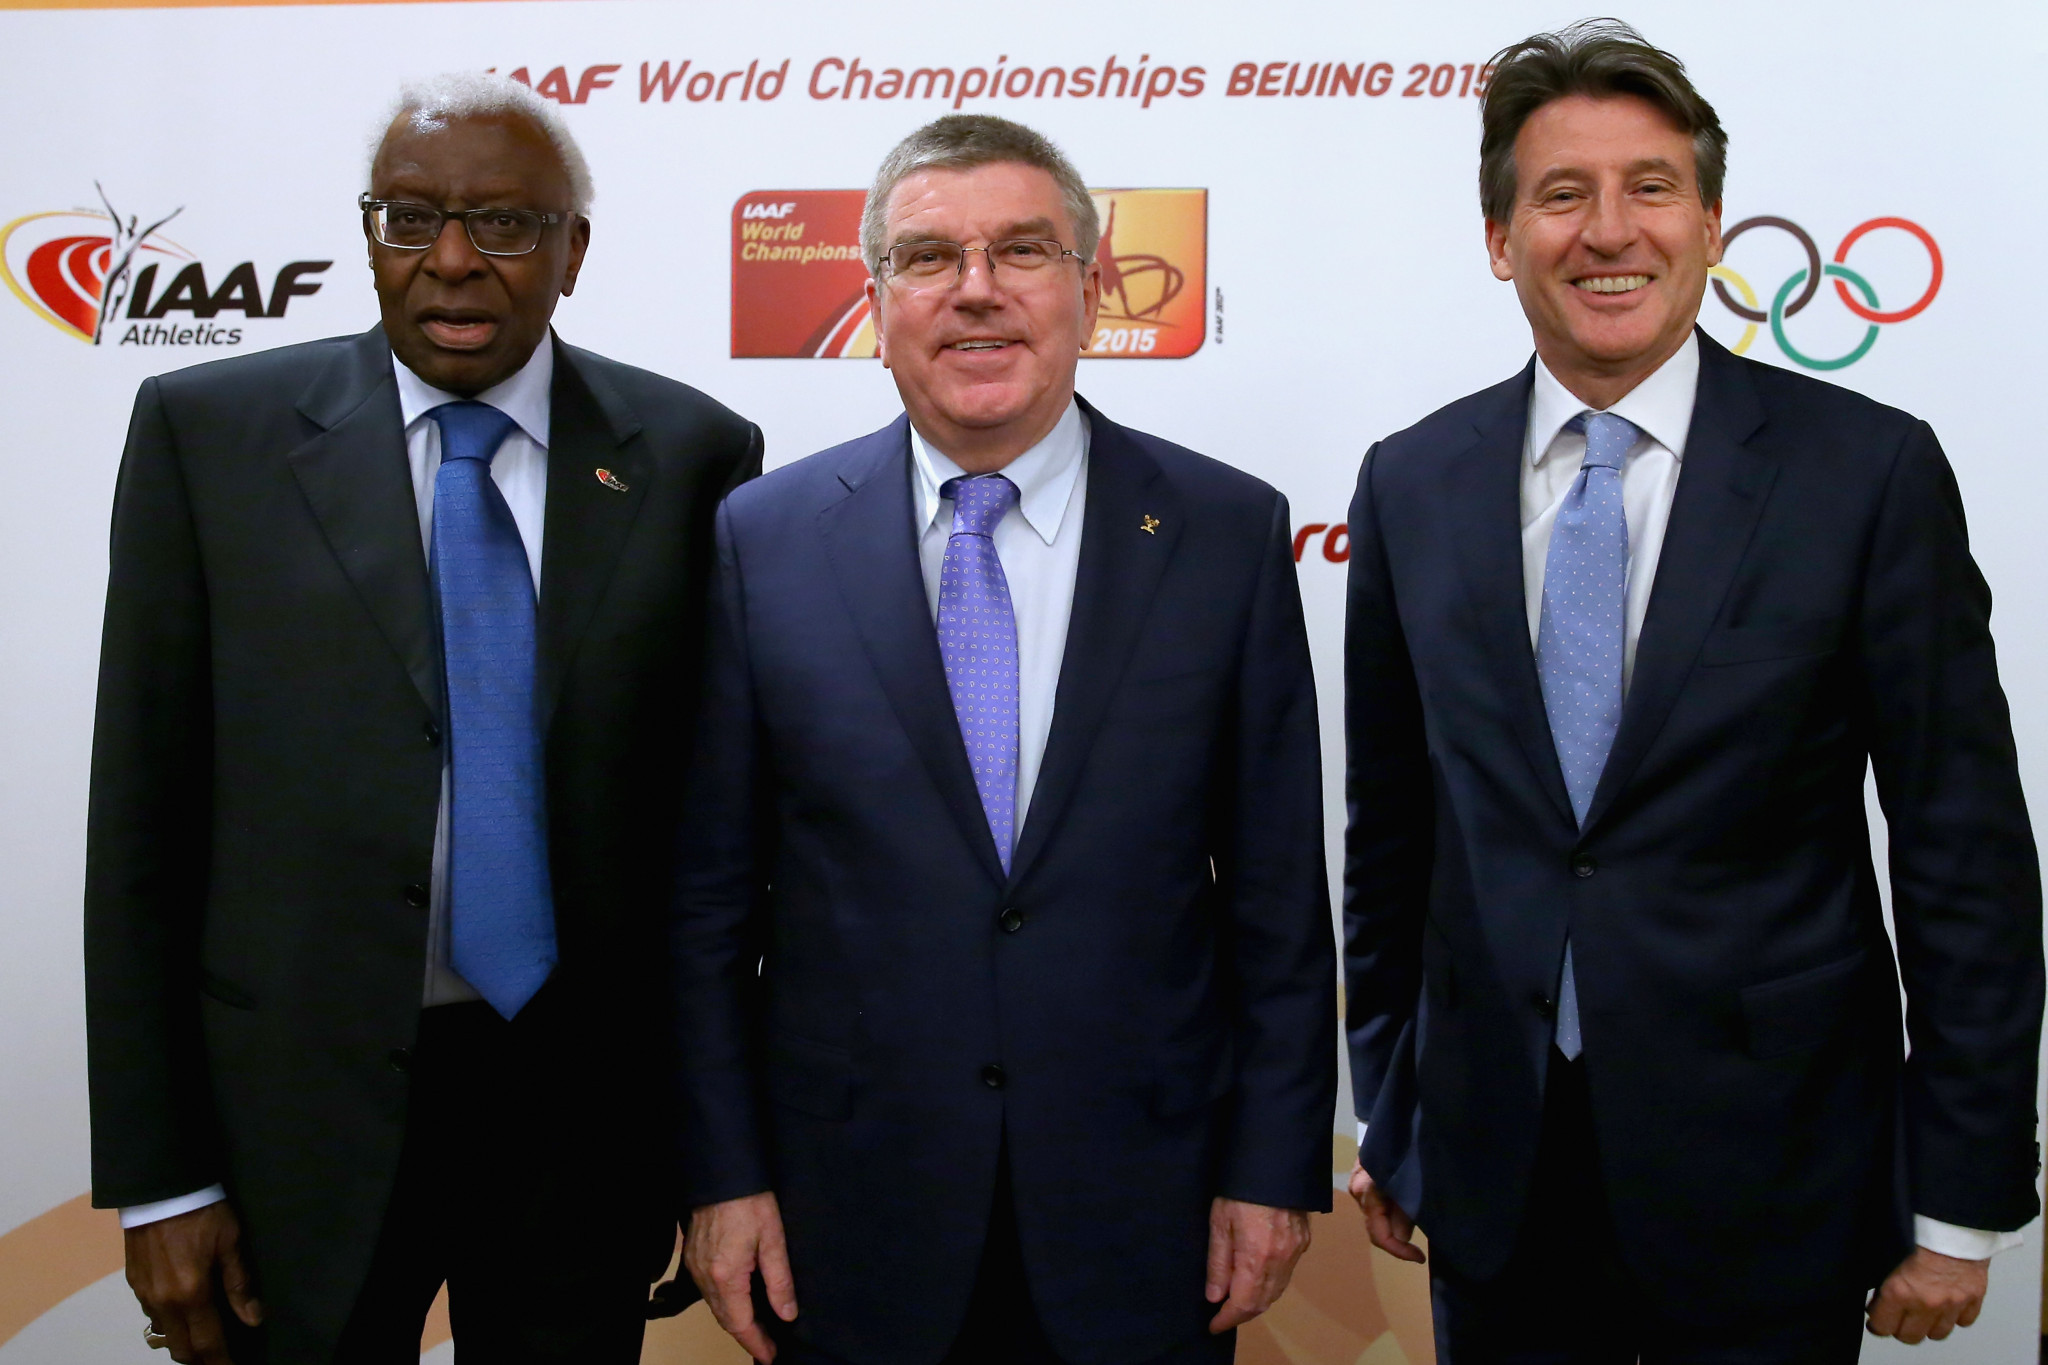 Lamine Diack, left, and Sebastian Coe, right, either side of IOC President Thomas Bach in 2015 ©Getty Images